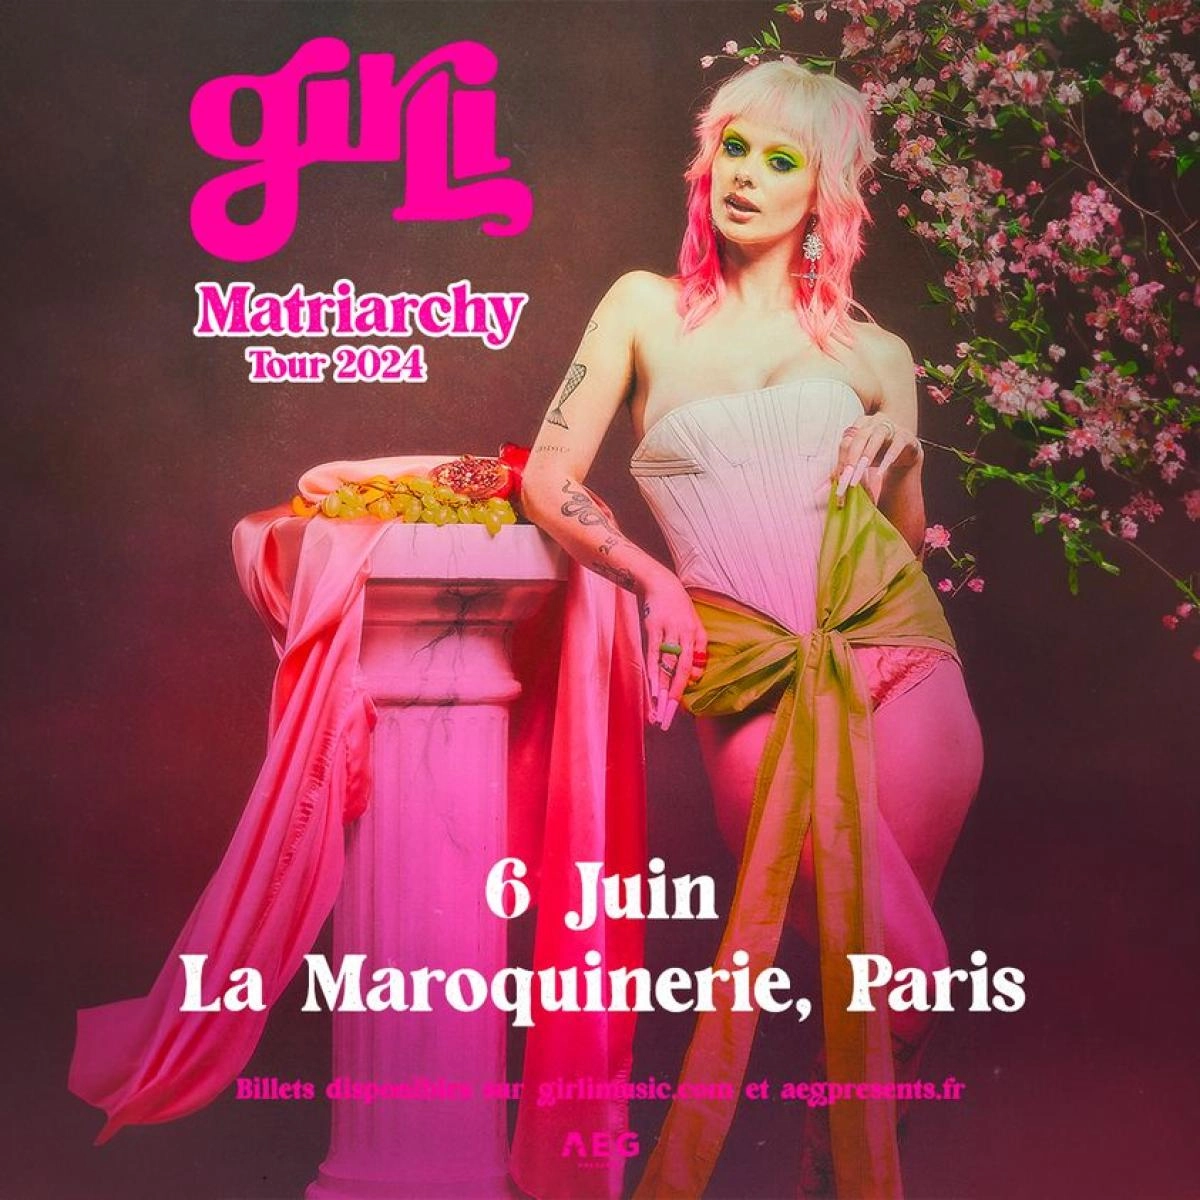 Girli at La Maroquinerie Tickets